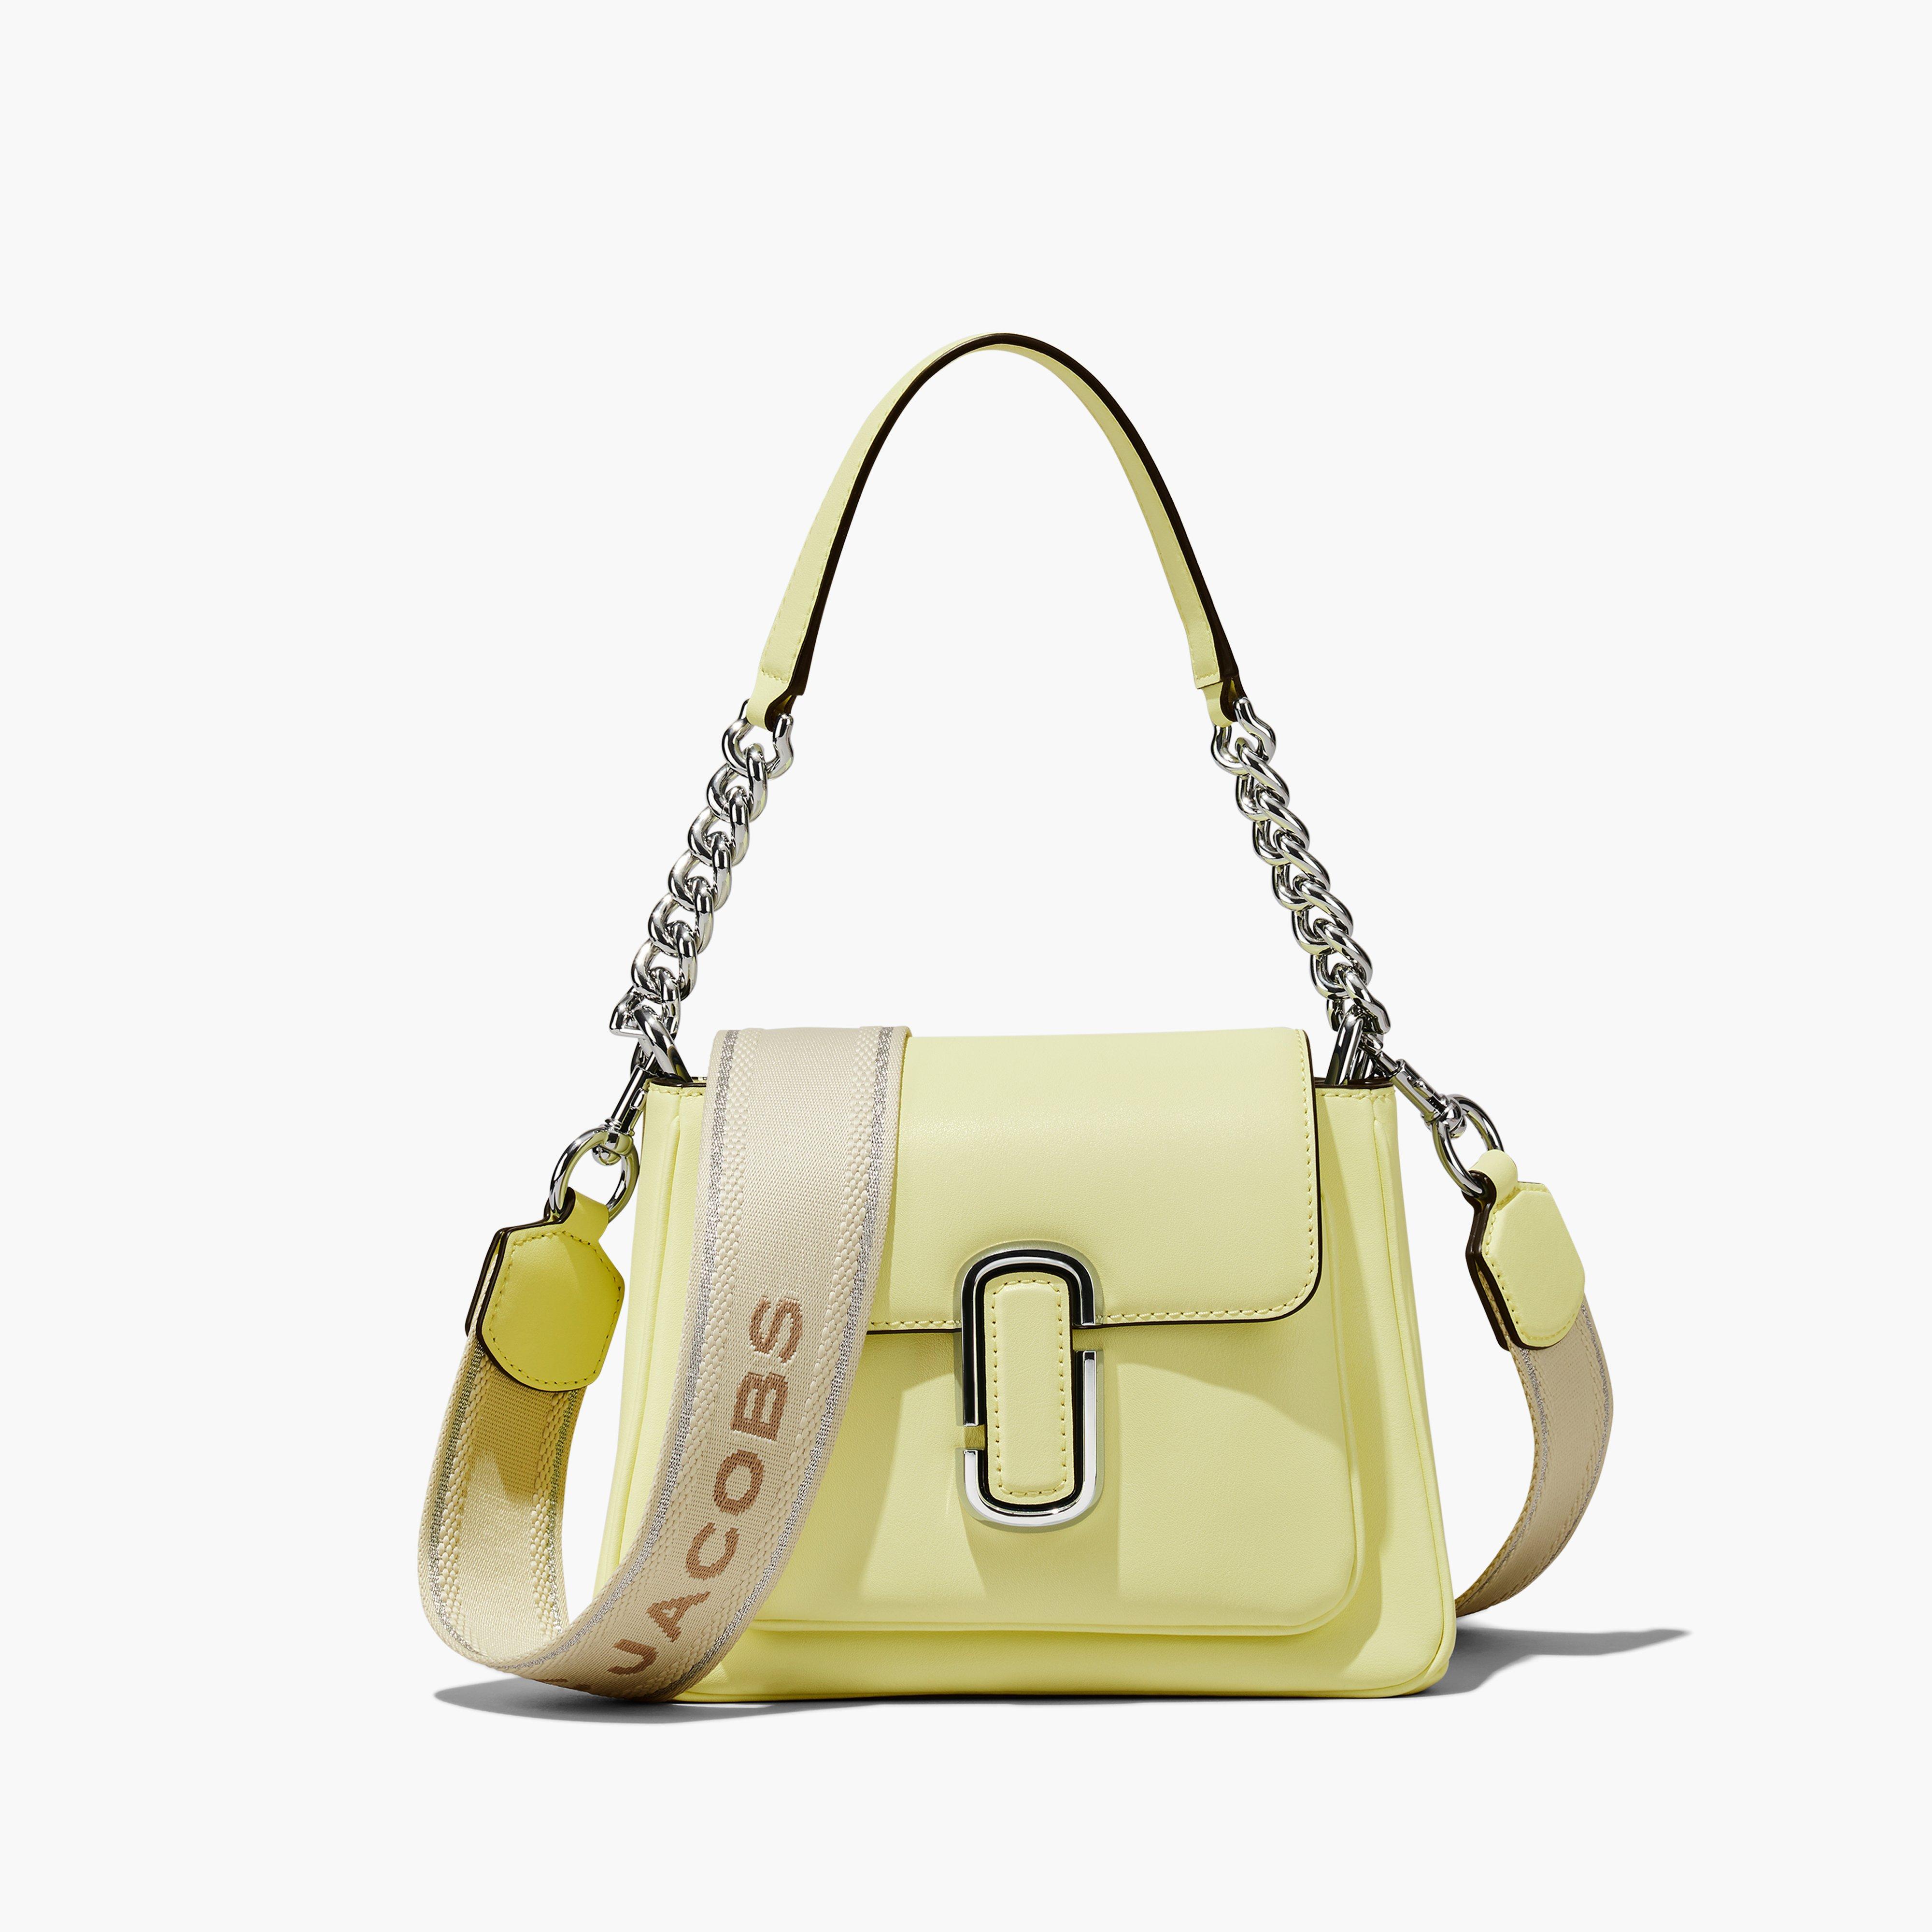 Marc by Marc jacobs The J Marc Chain Mini Satchel,TENDER YELLOW